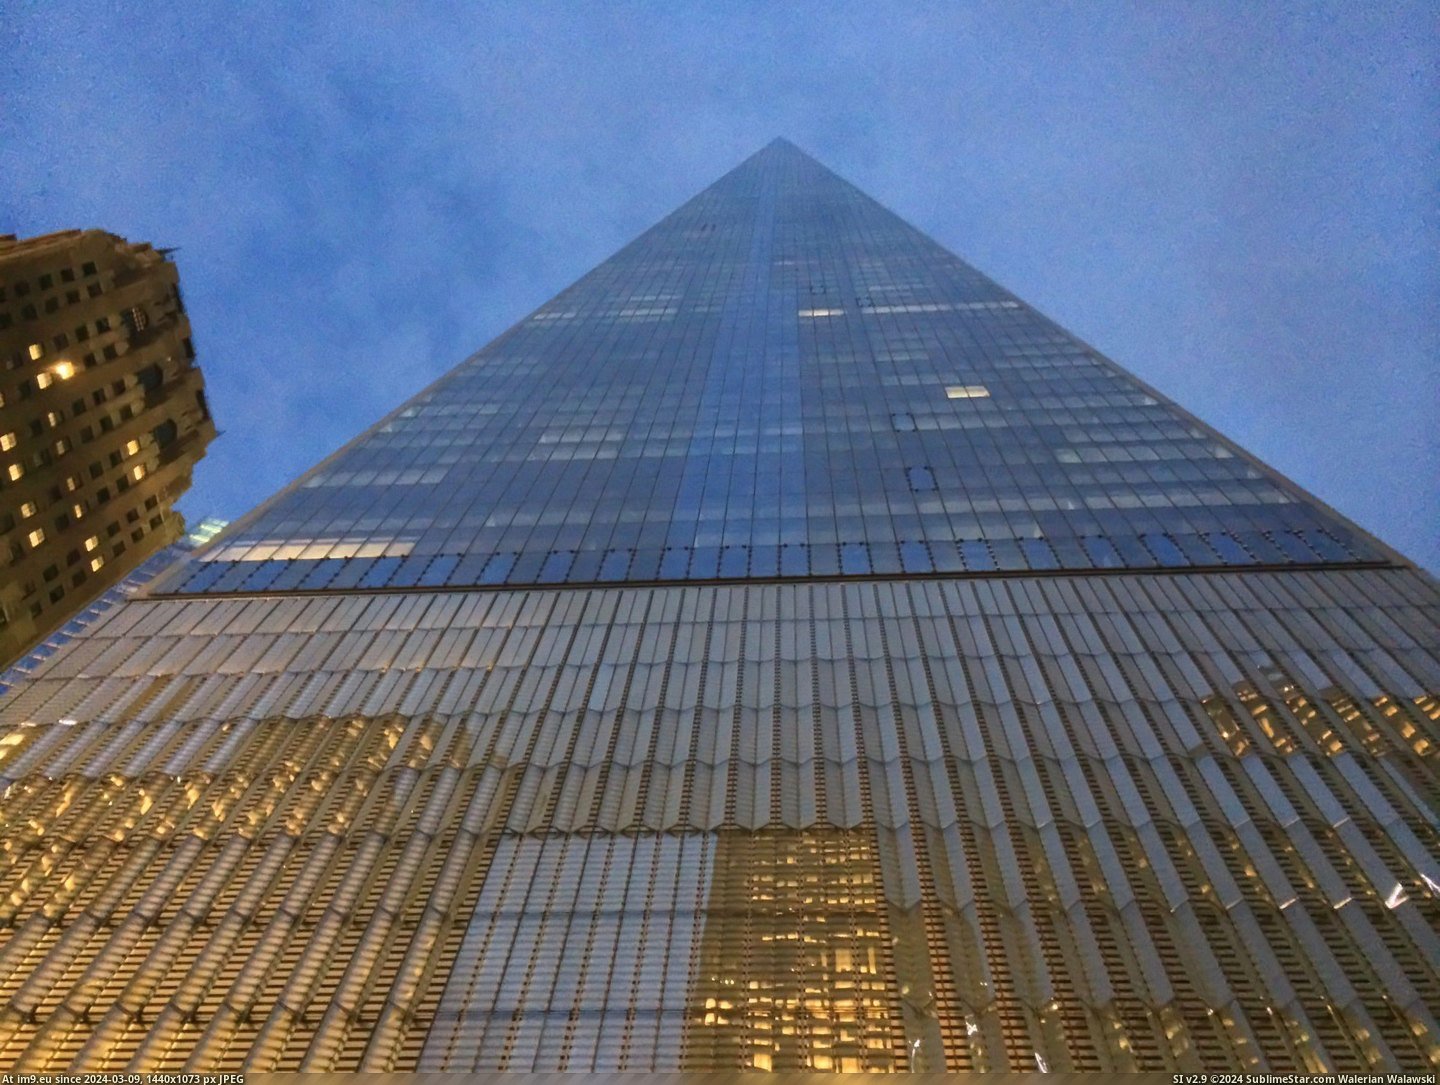 #One #World #Center #Freedom #Trade #Nyc #Tower [Mildlyinteresting] The new One World Trade Center (Freedom Tower) in NYC looks like it goes on forever when you're next to it Pic. (Image of album My r/MILDLYINTERESTING favs))